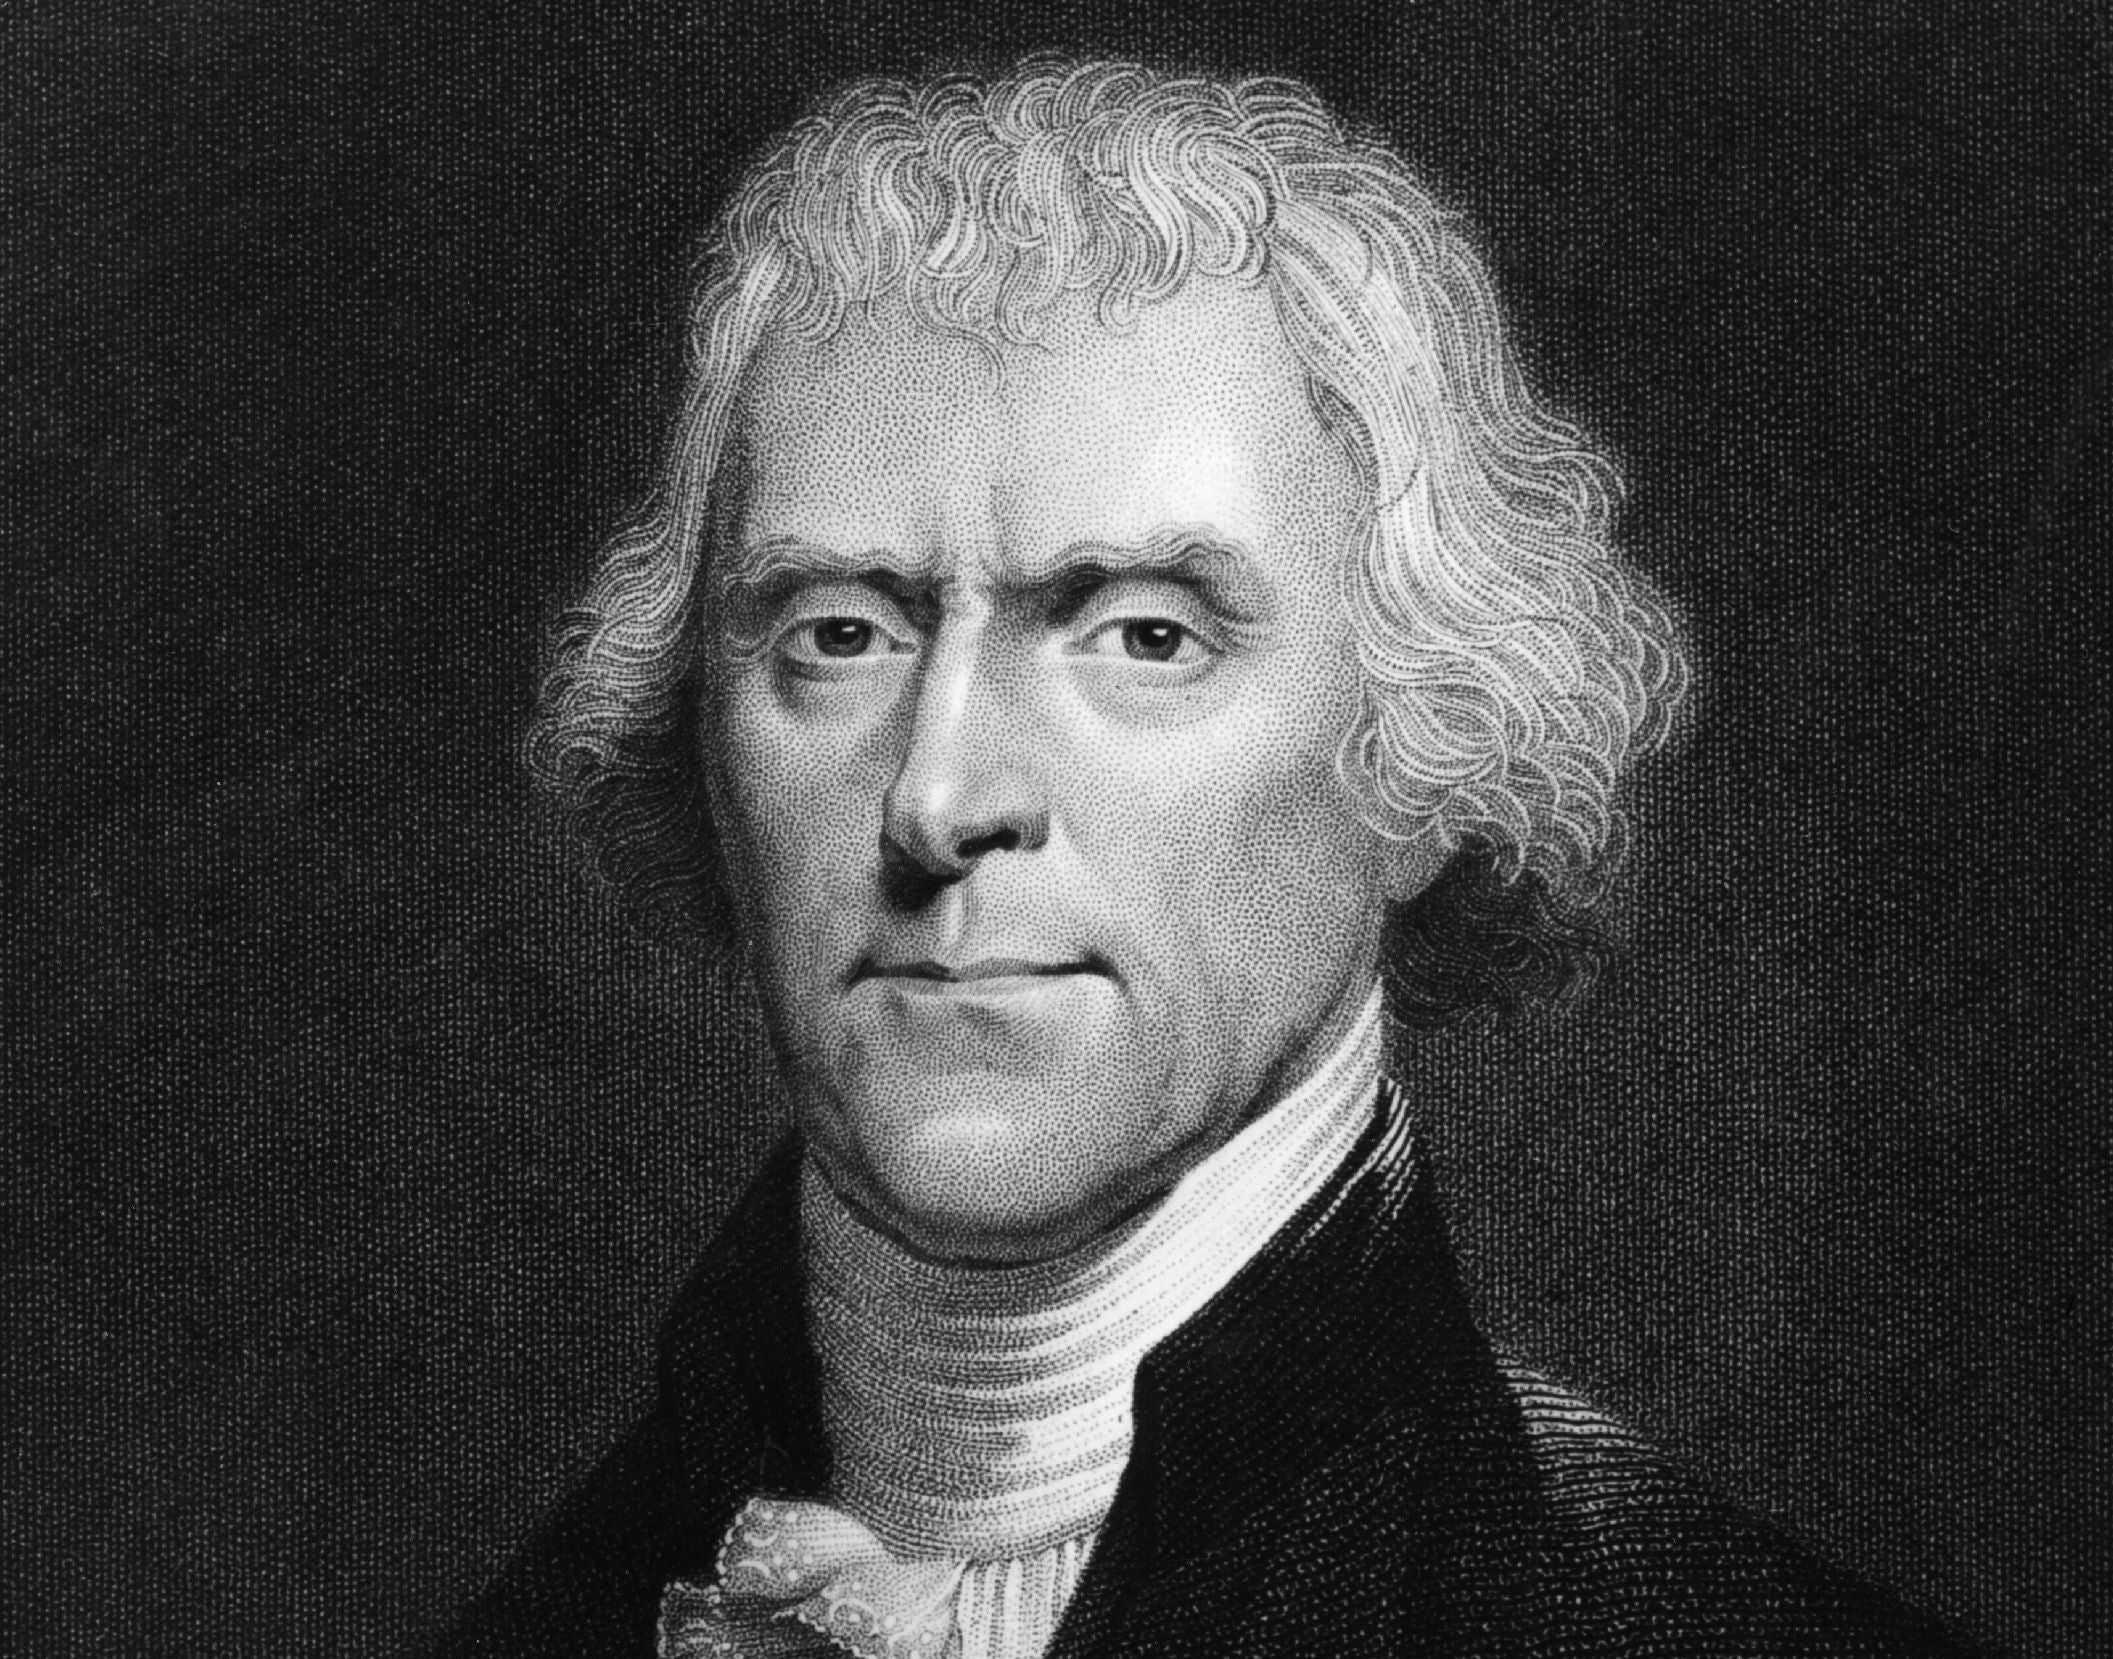 Thomas Jefferson (1743 - 1826), the 3rd President of the United States